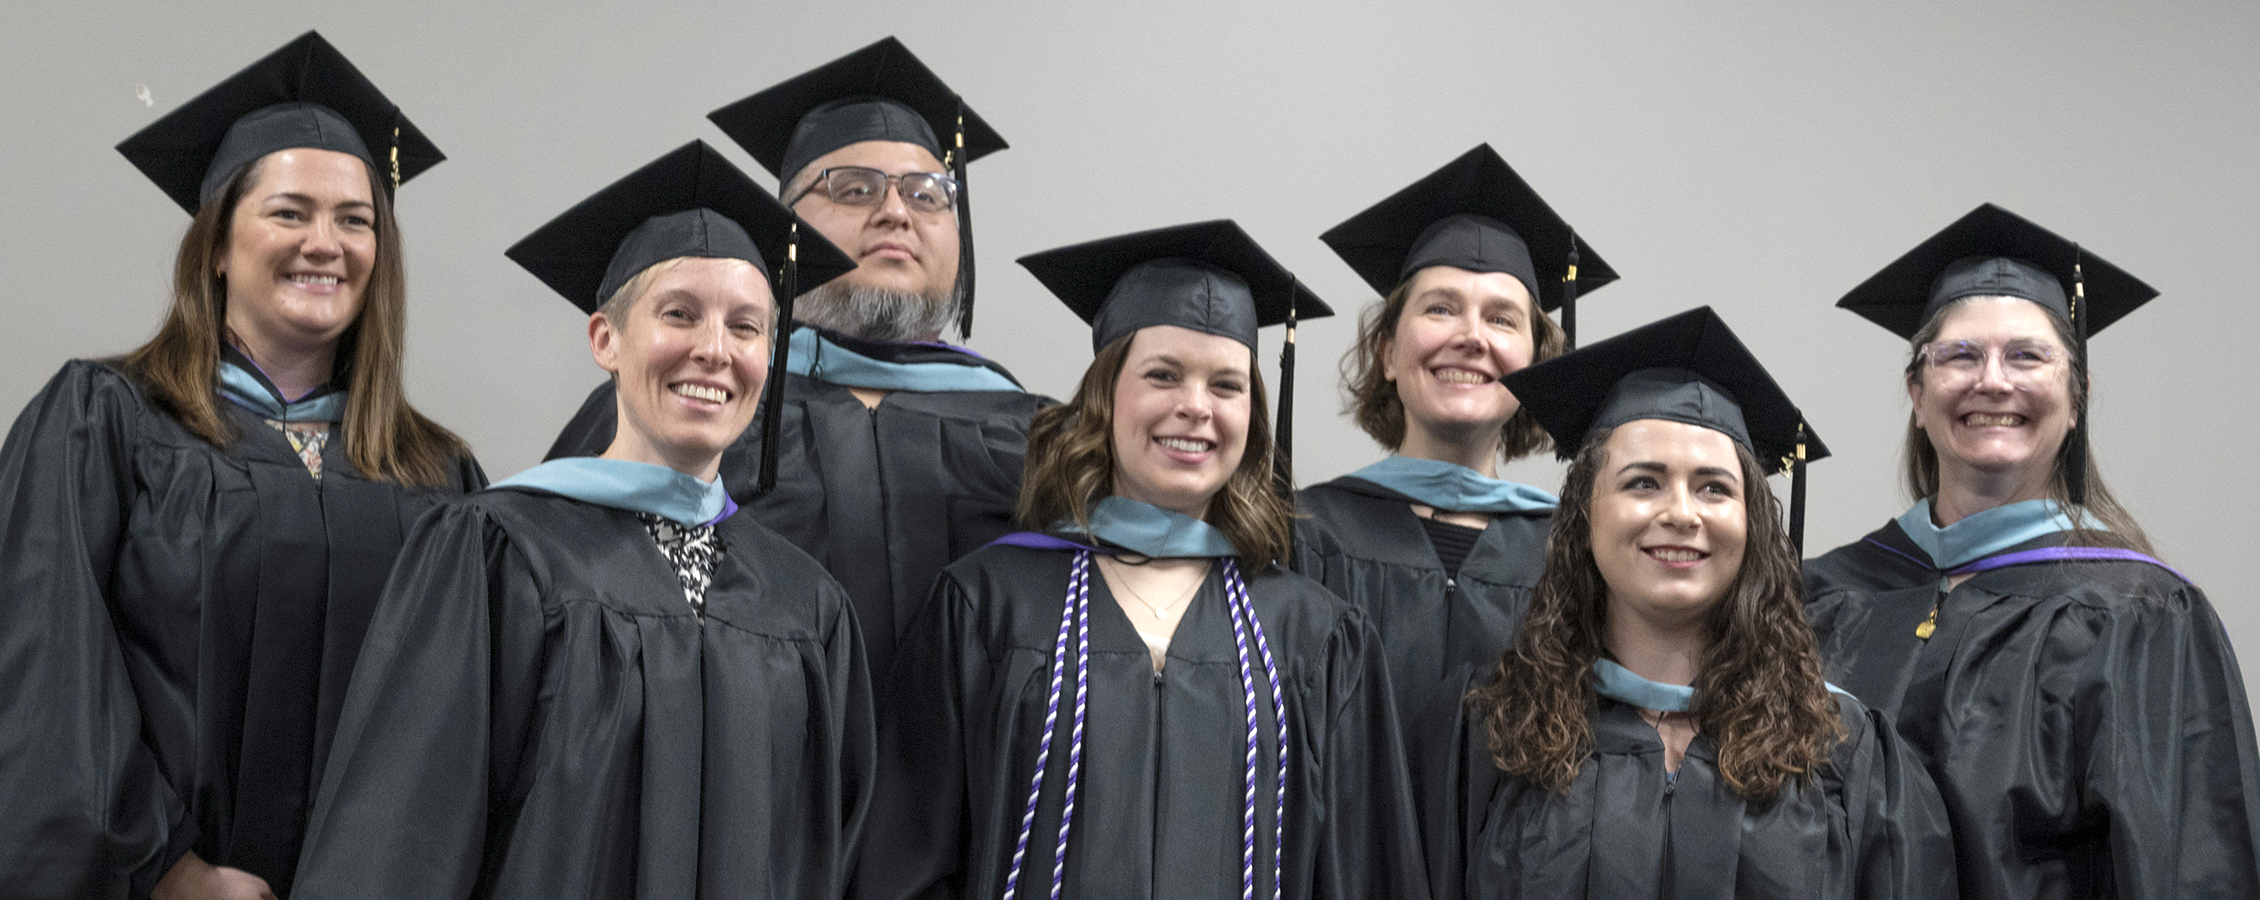 A group of students pose together in their academic regalia.